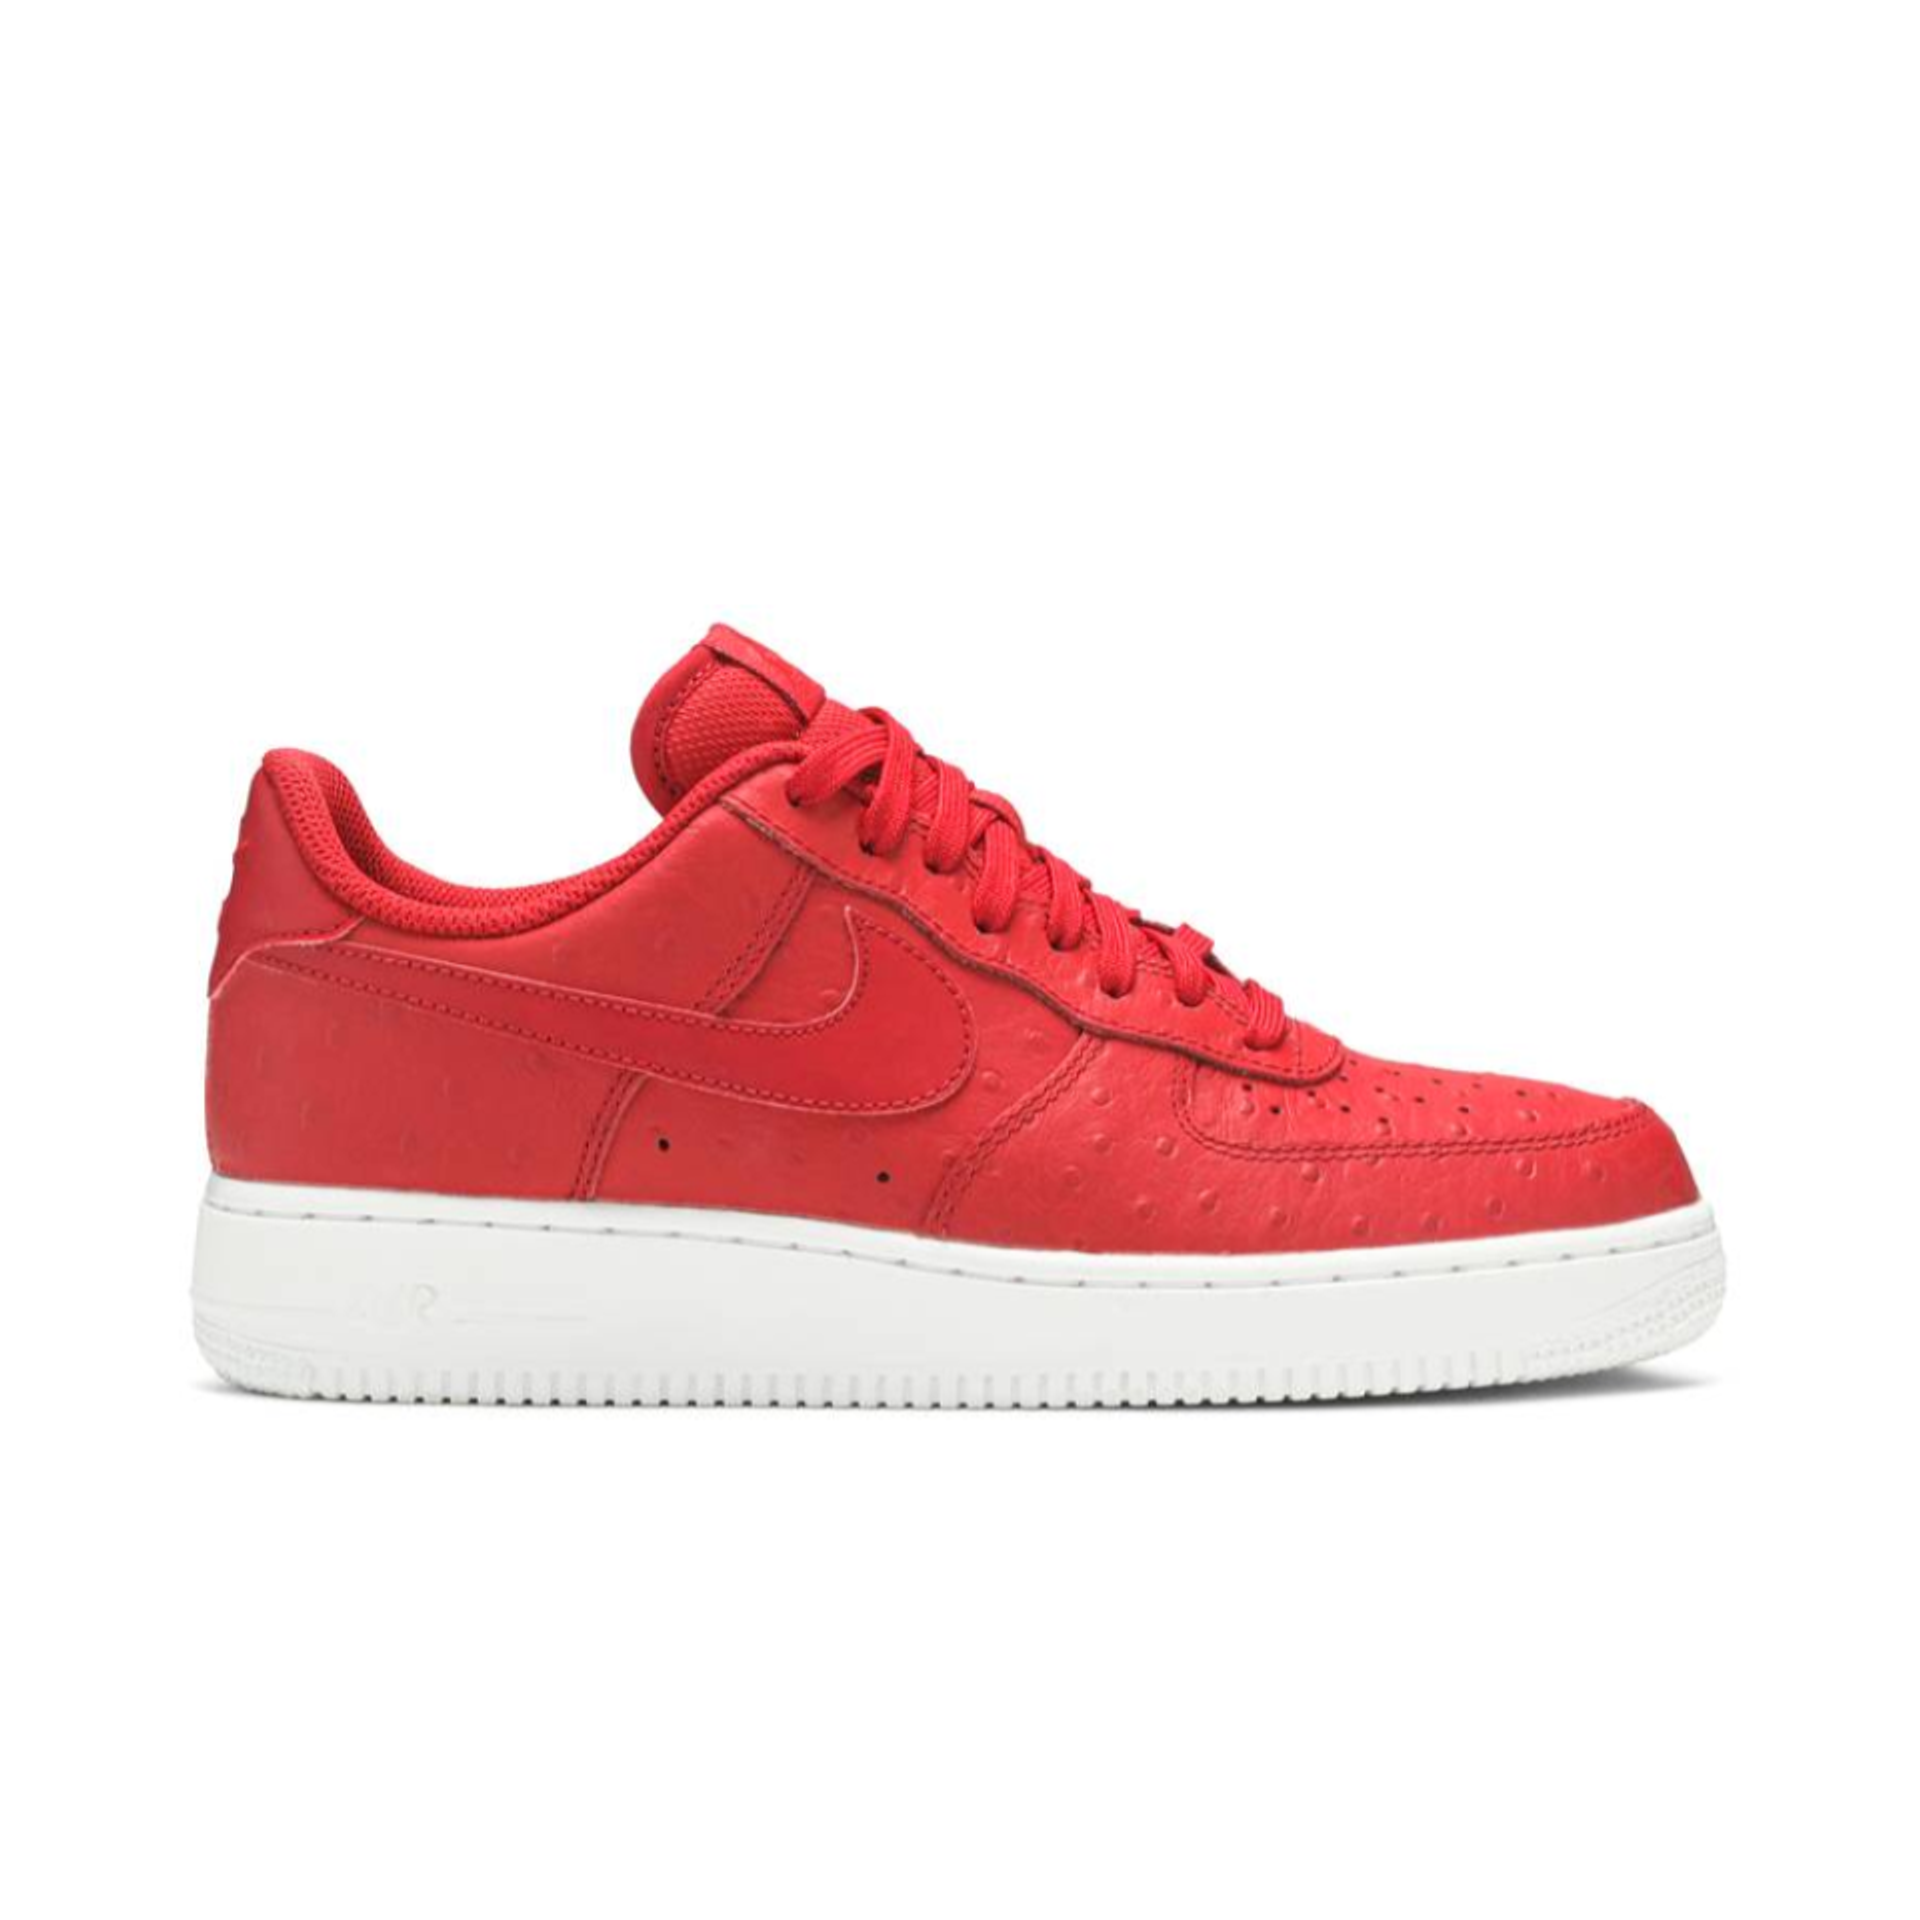 Nike Air Force 1 Low '07 LV8 'Gym Red'